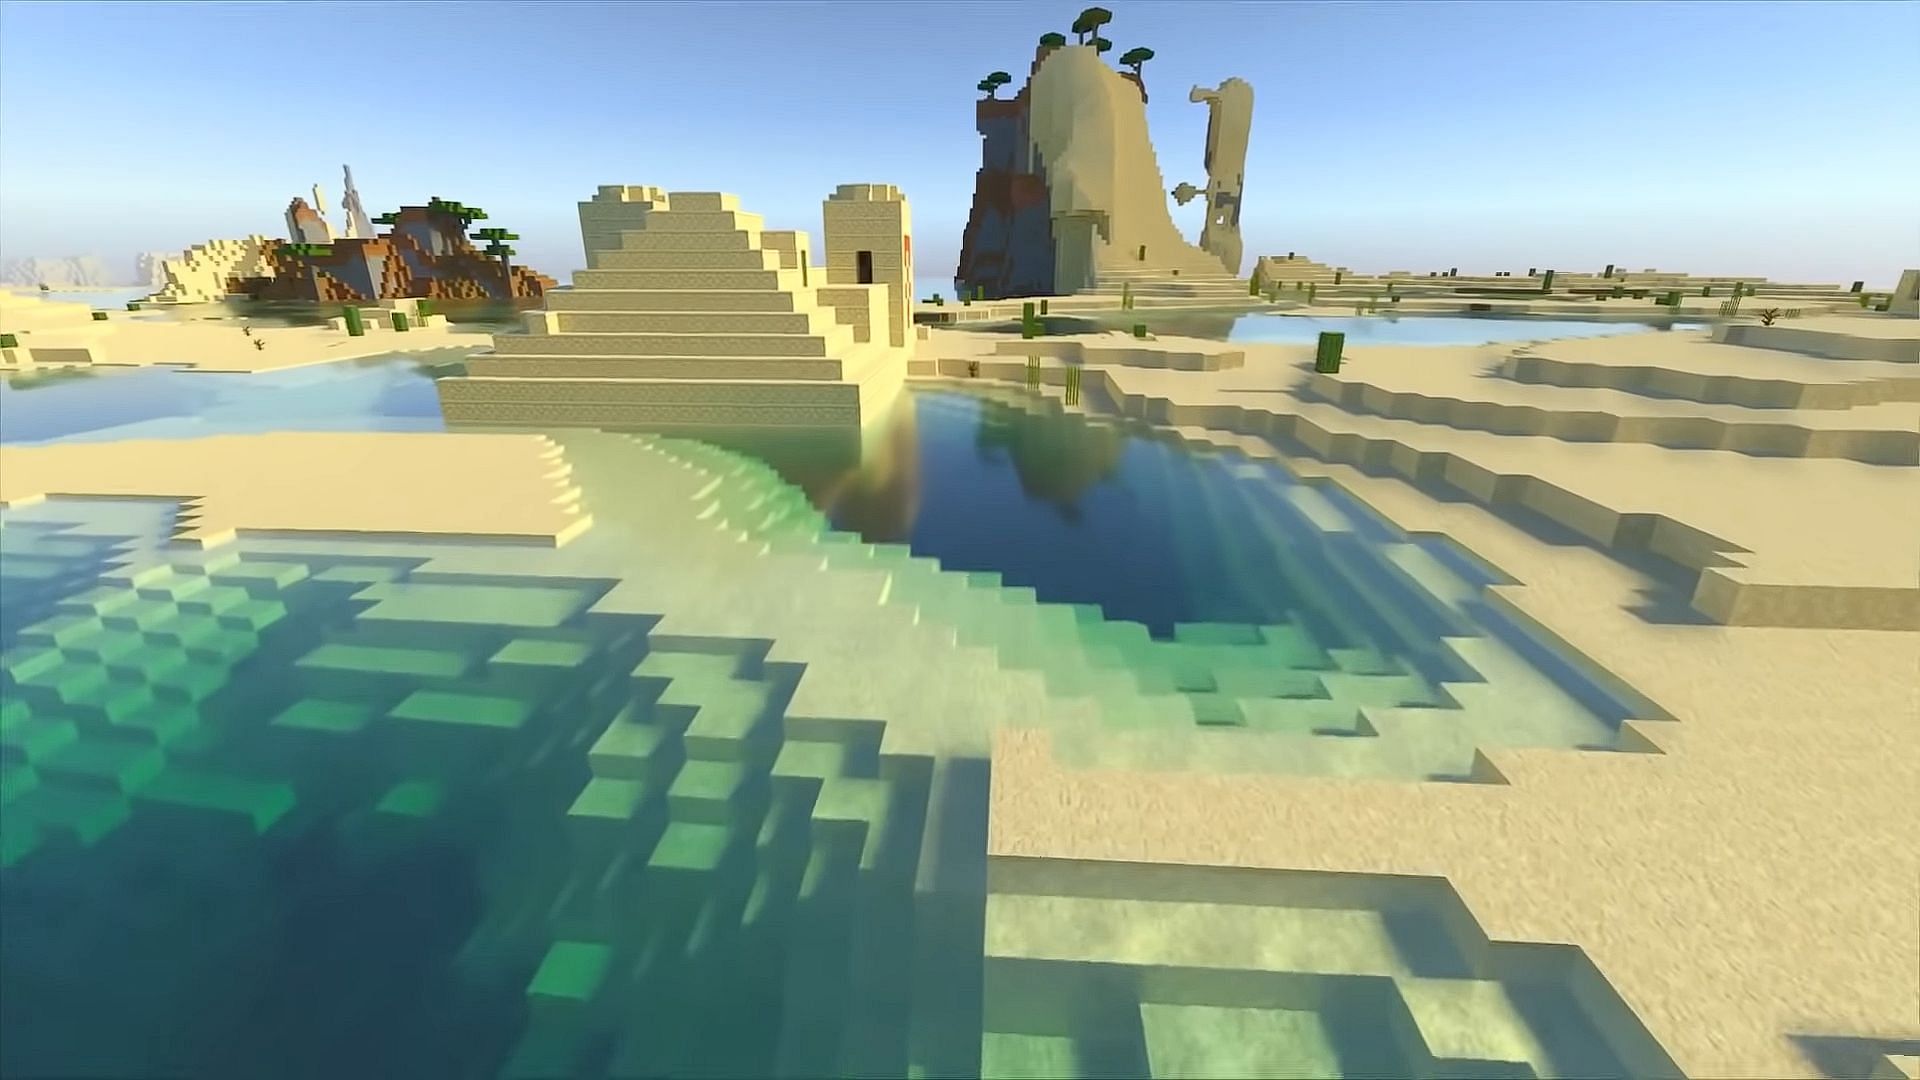 The desert temples can be found opposite the village (Image via Minecraft &amp; Chill on YouTube)